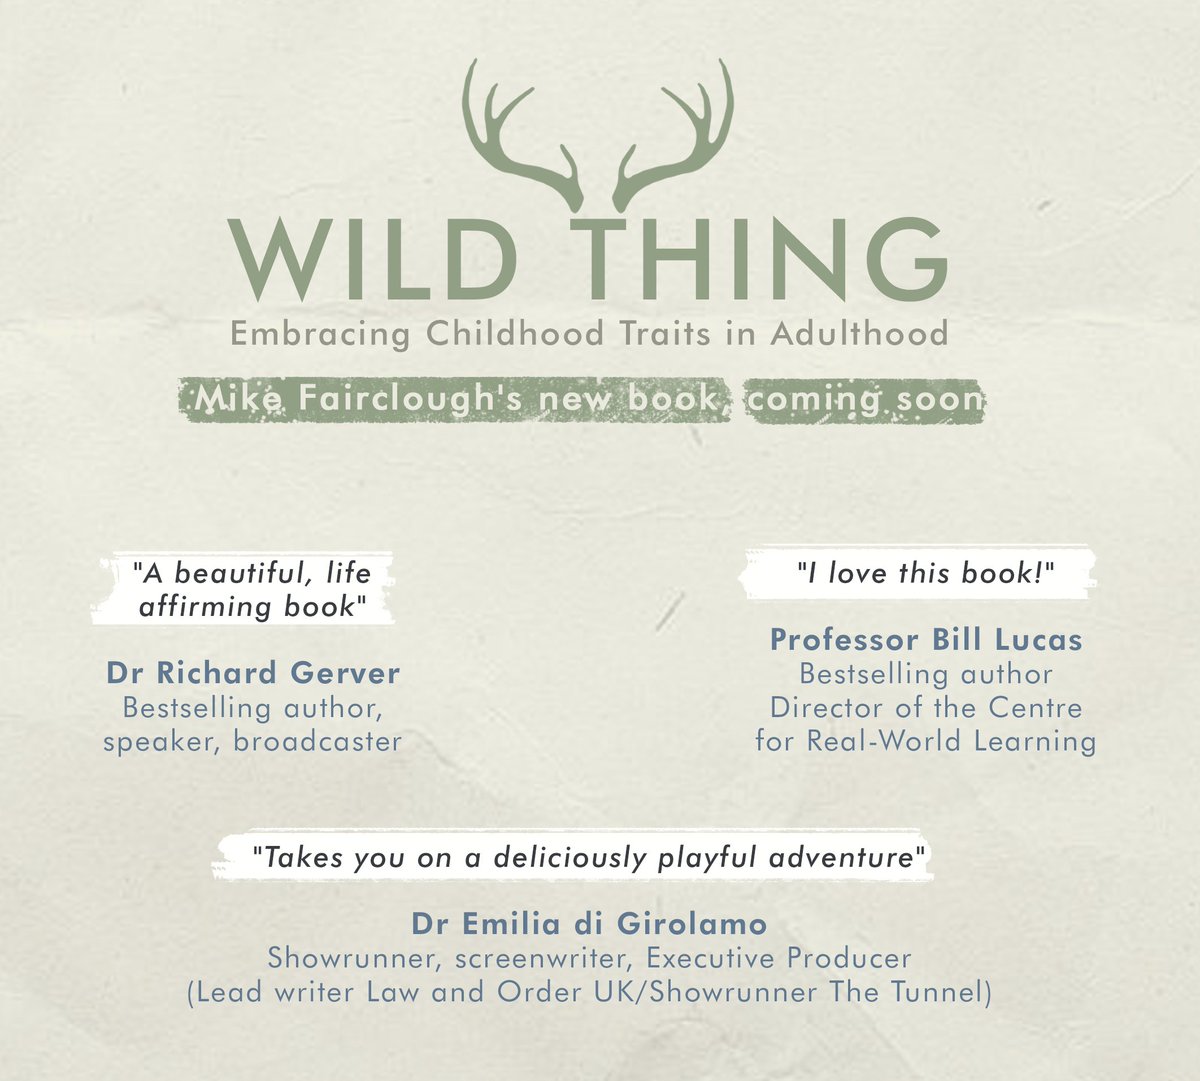 Mike Fairclough On Twitter More Lovely Quotes From The Legends Richard Gerver And Bill Lucas For My New Book Wild Thing Embracing Childhood Traits In Adulthood Out Soon Richardgerver Lucaslearn Wildthing Books